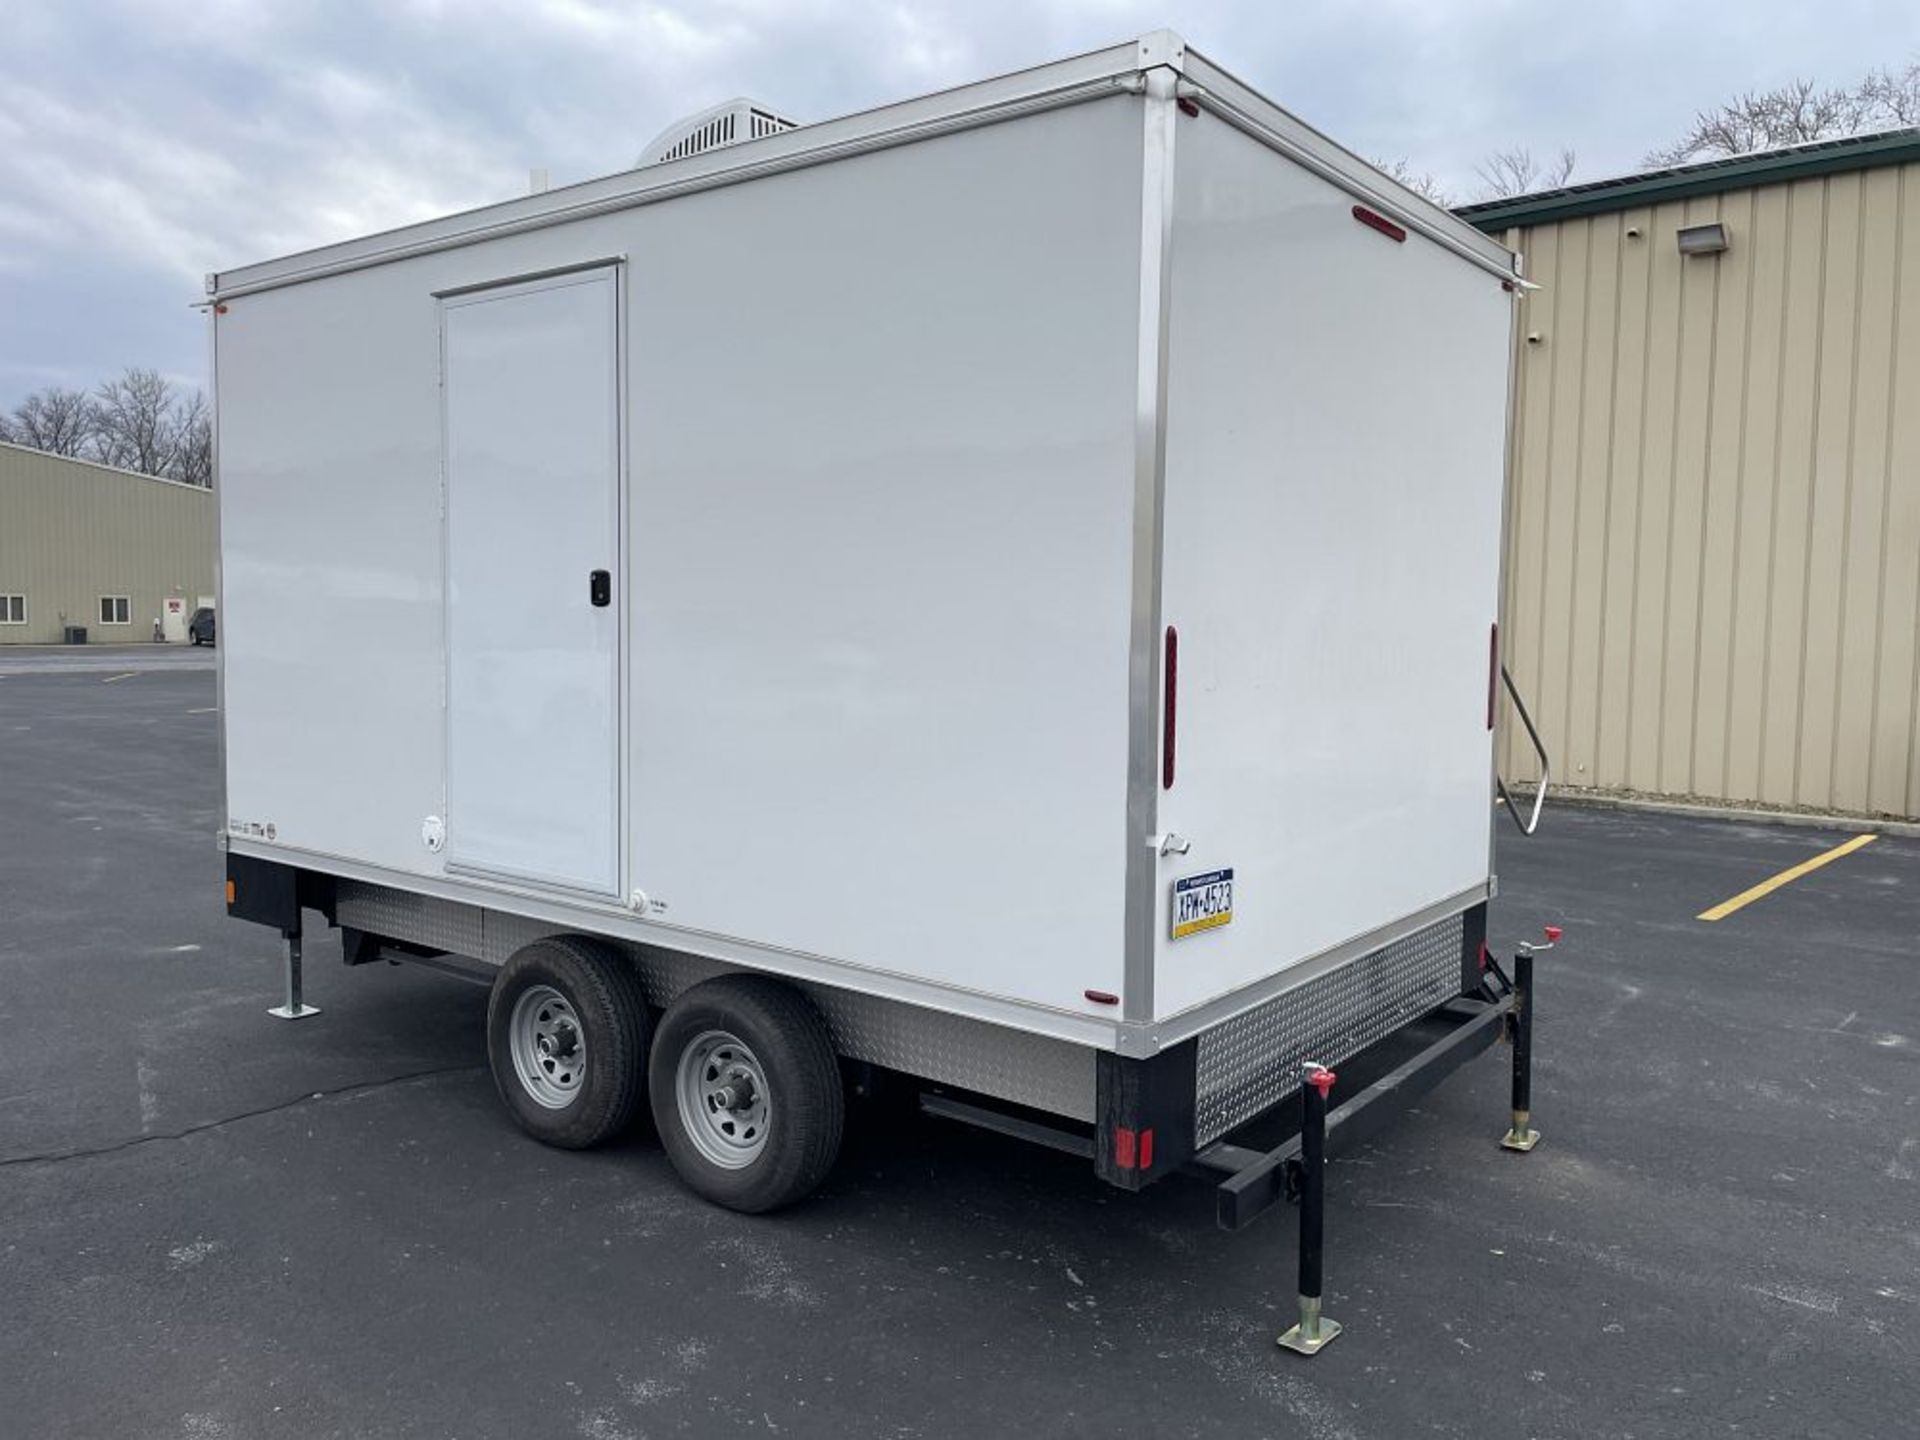 2022 LANG SPECIALTY RESTROOM TRAILER, 5 STALL - Image 8 of 18